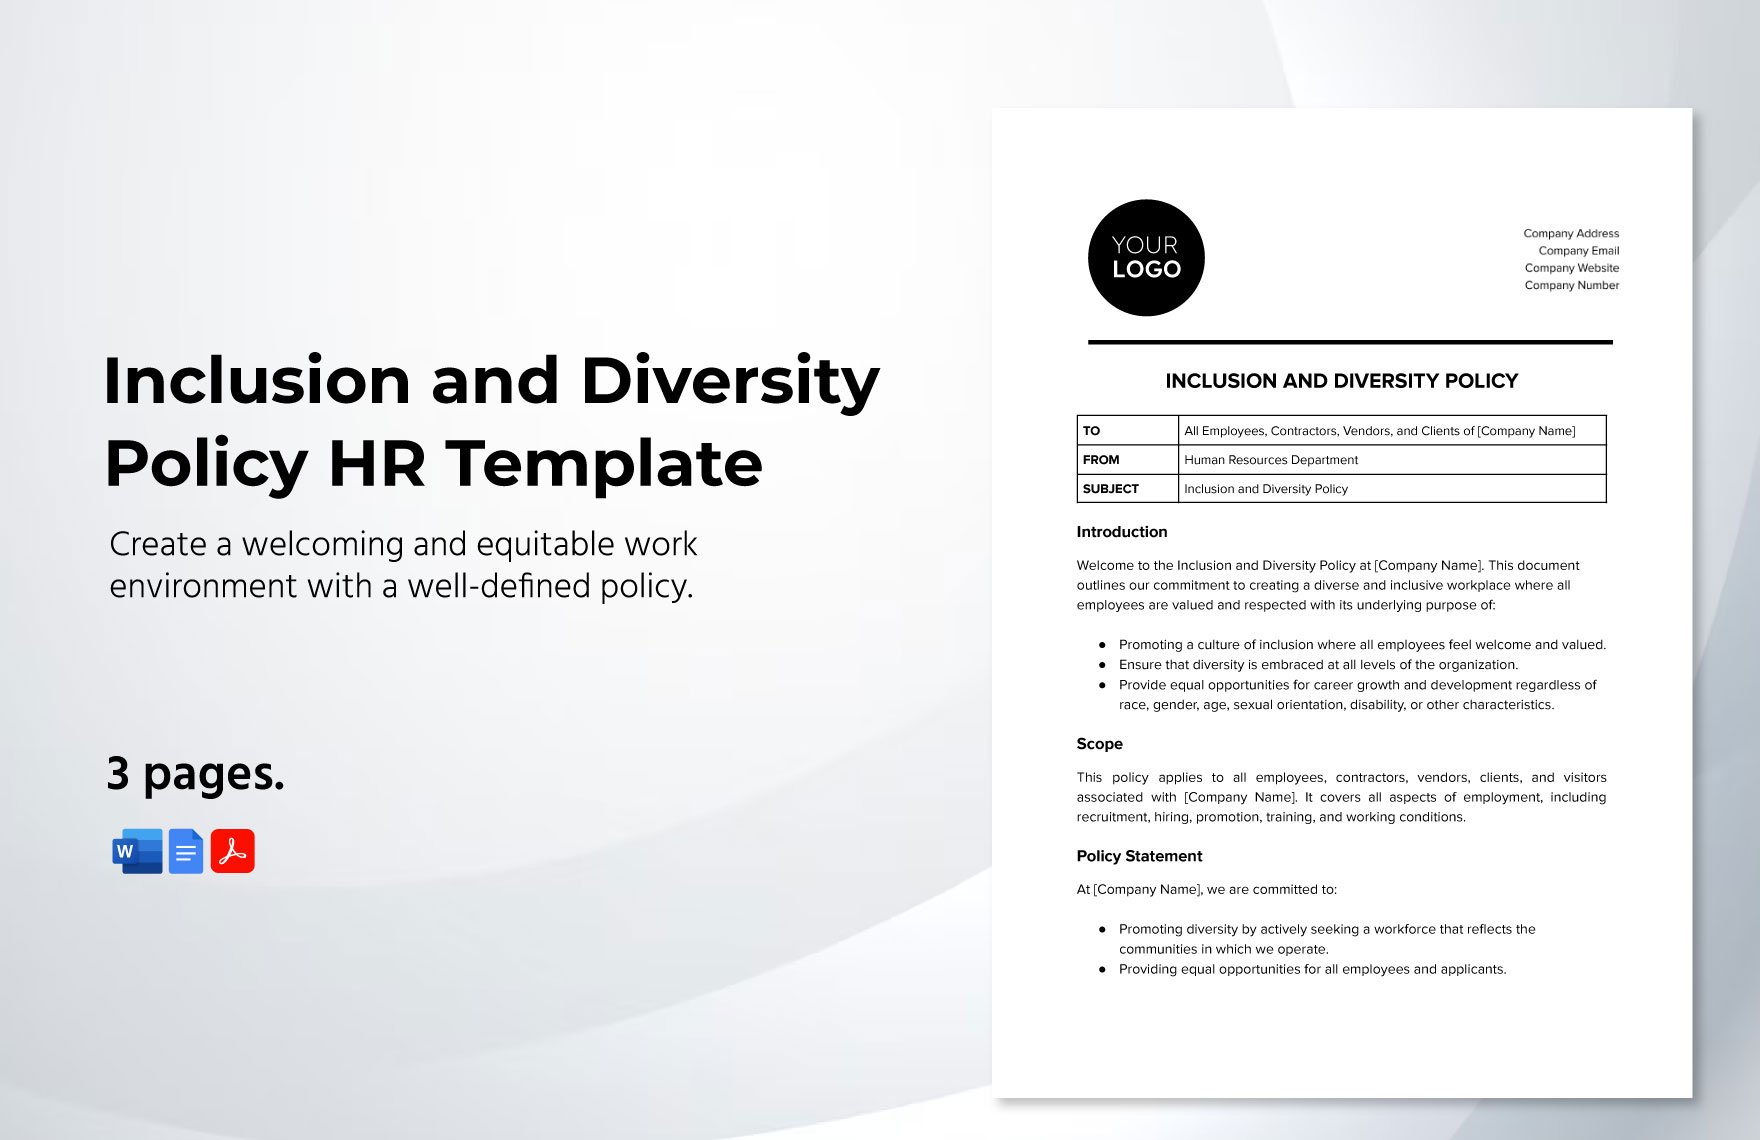 Inclusion and Diversity Policy HR Template